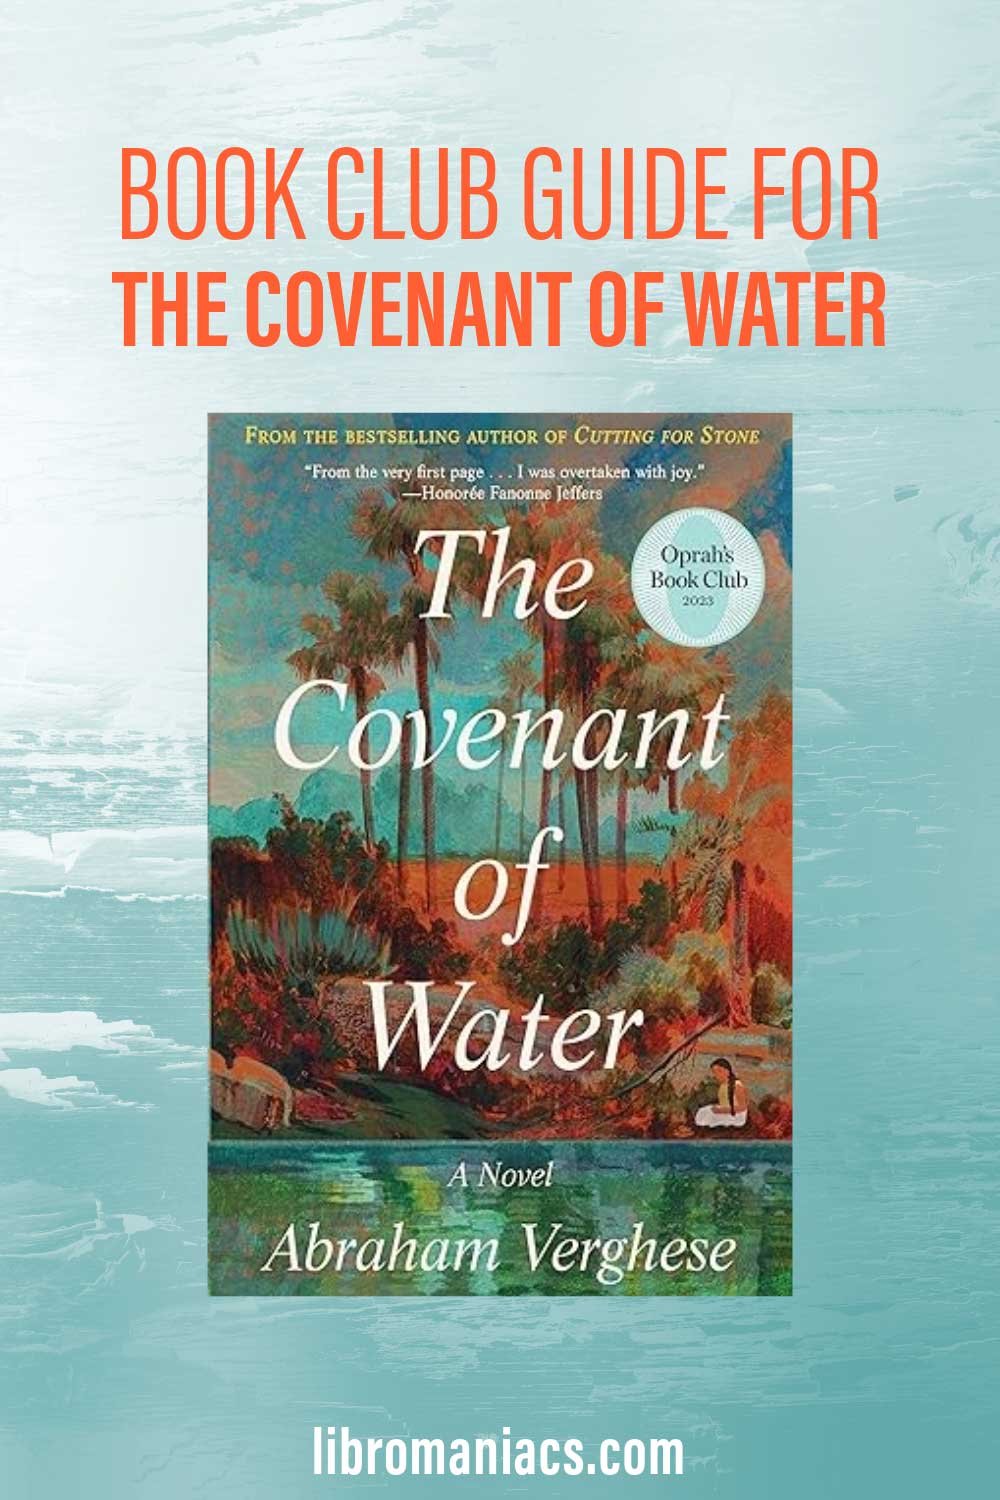 Book club questions for The Covenant of Water.